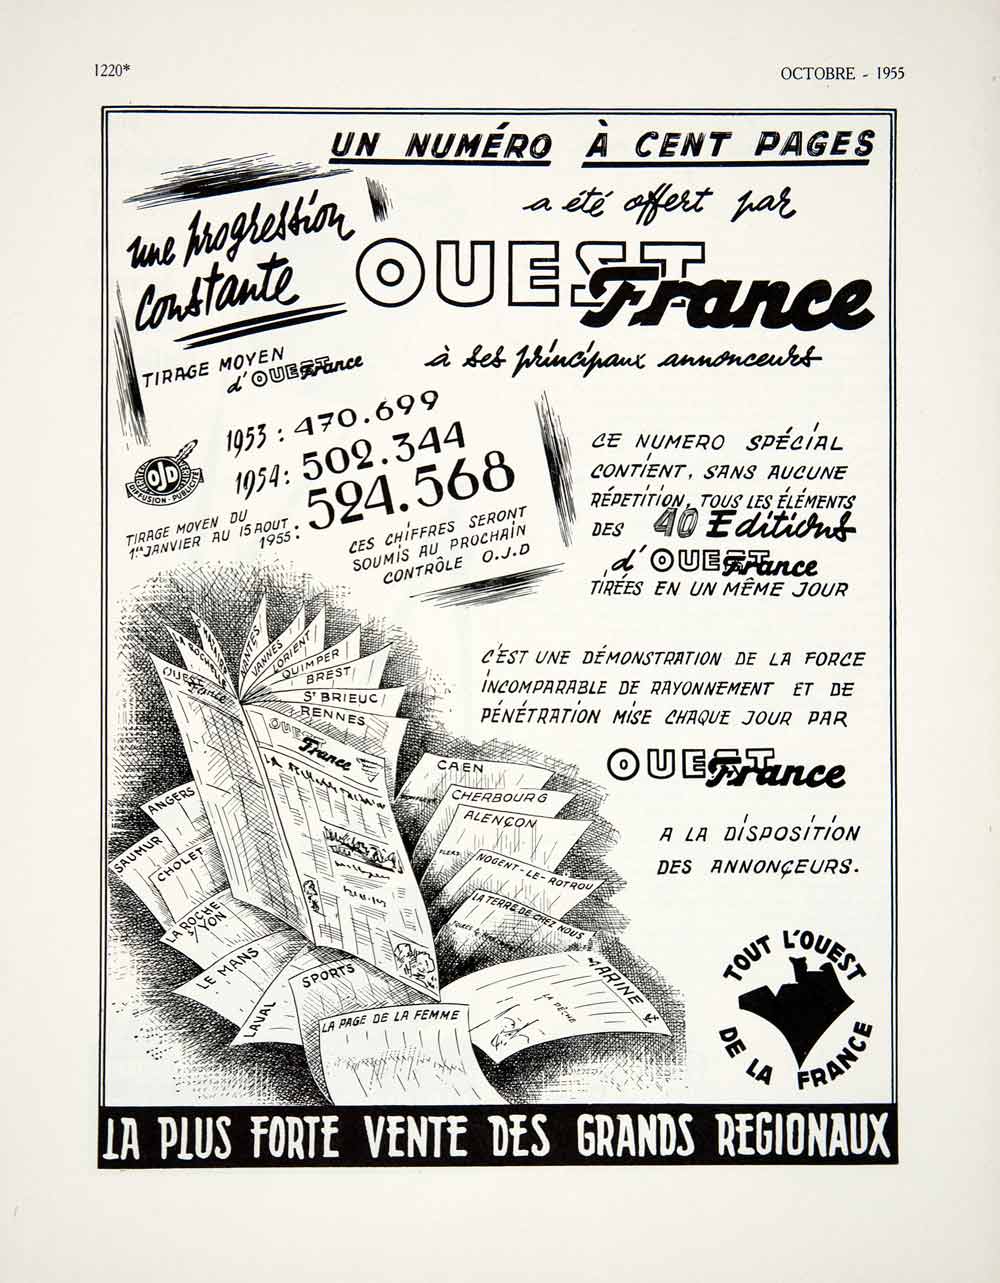 1955 Ad Ouest France Newspaper Paper French Advertising Cherbourg